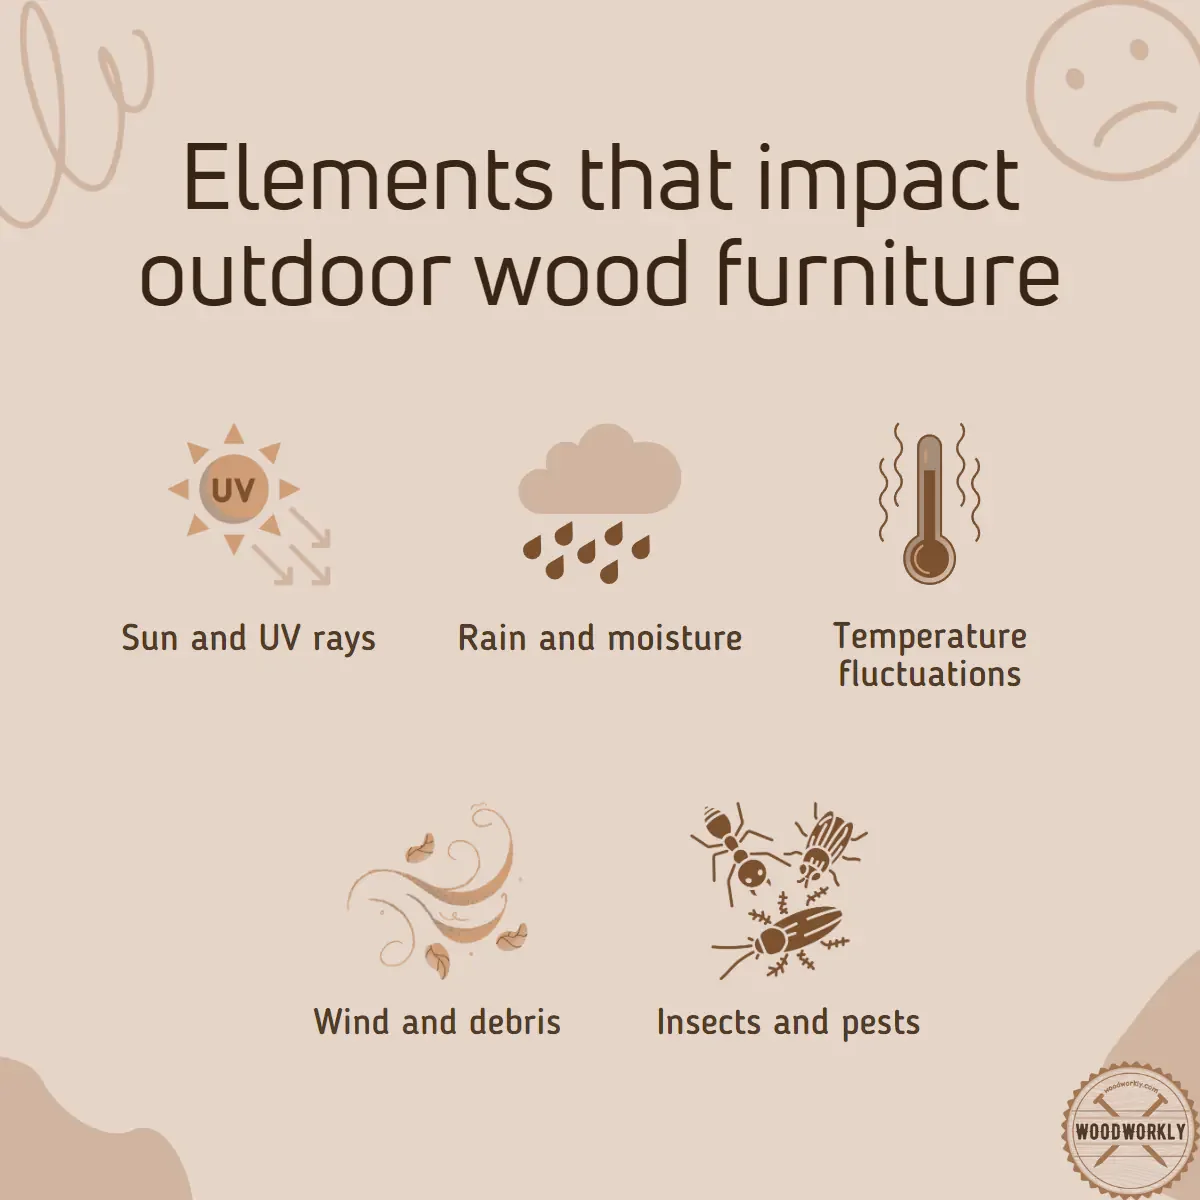 Elements that impact outdoor wood furniture